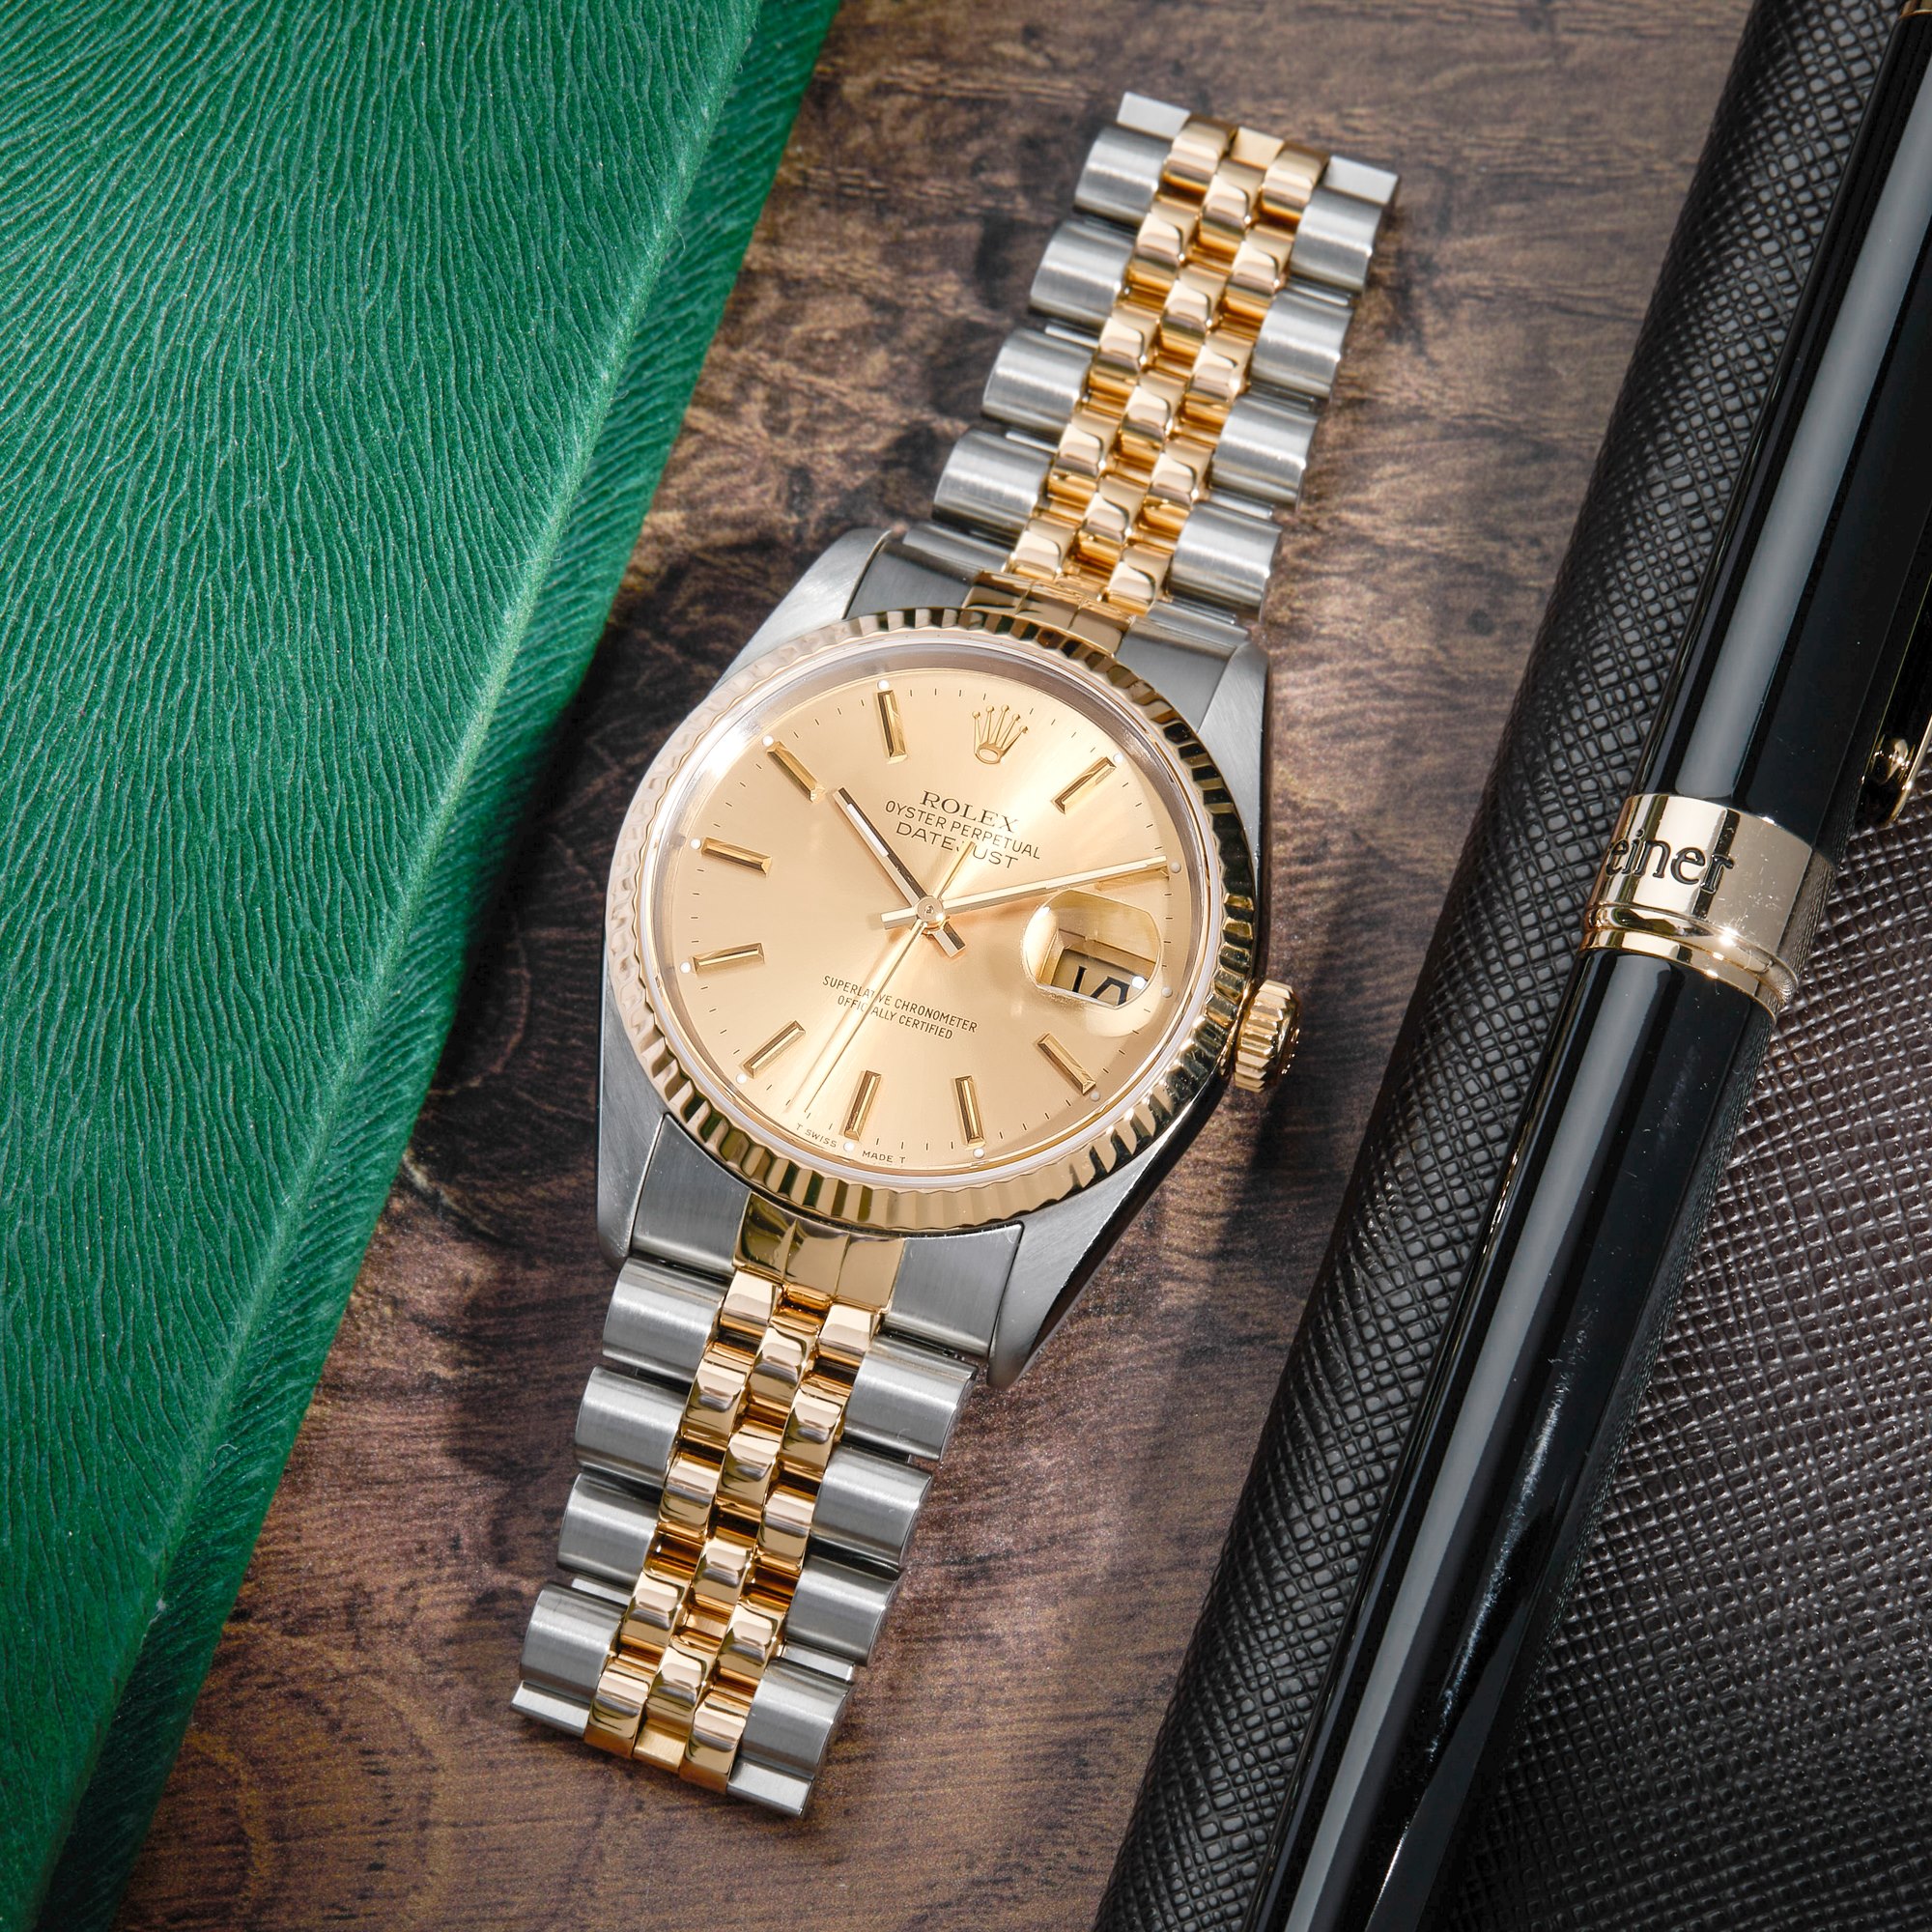 Rolex Datejust 36 Yellow Gold & Stainless Steel 16233